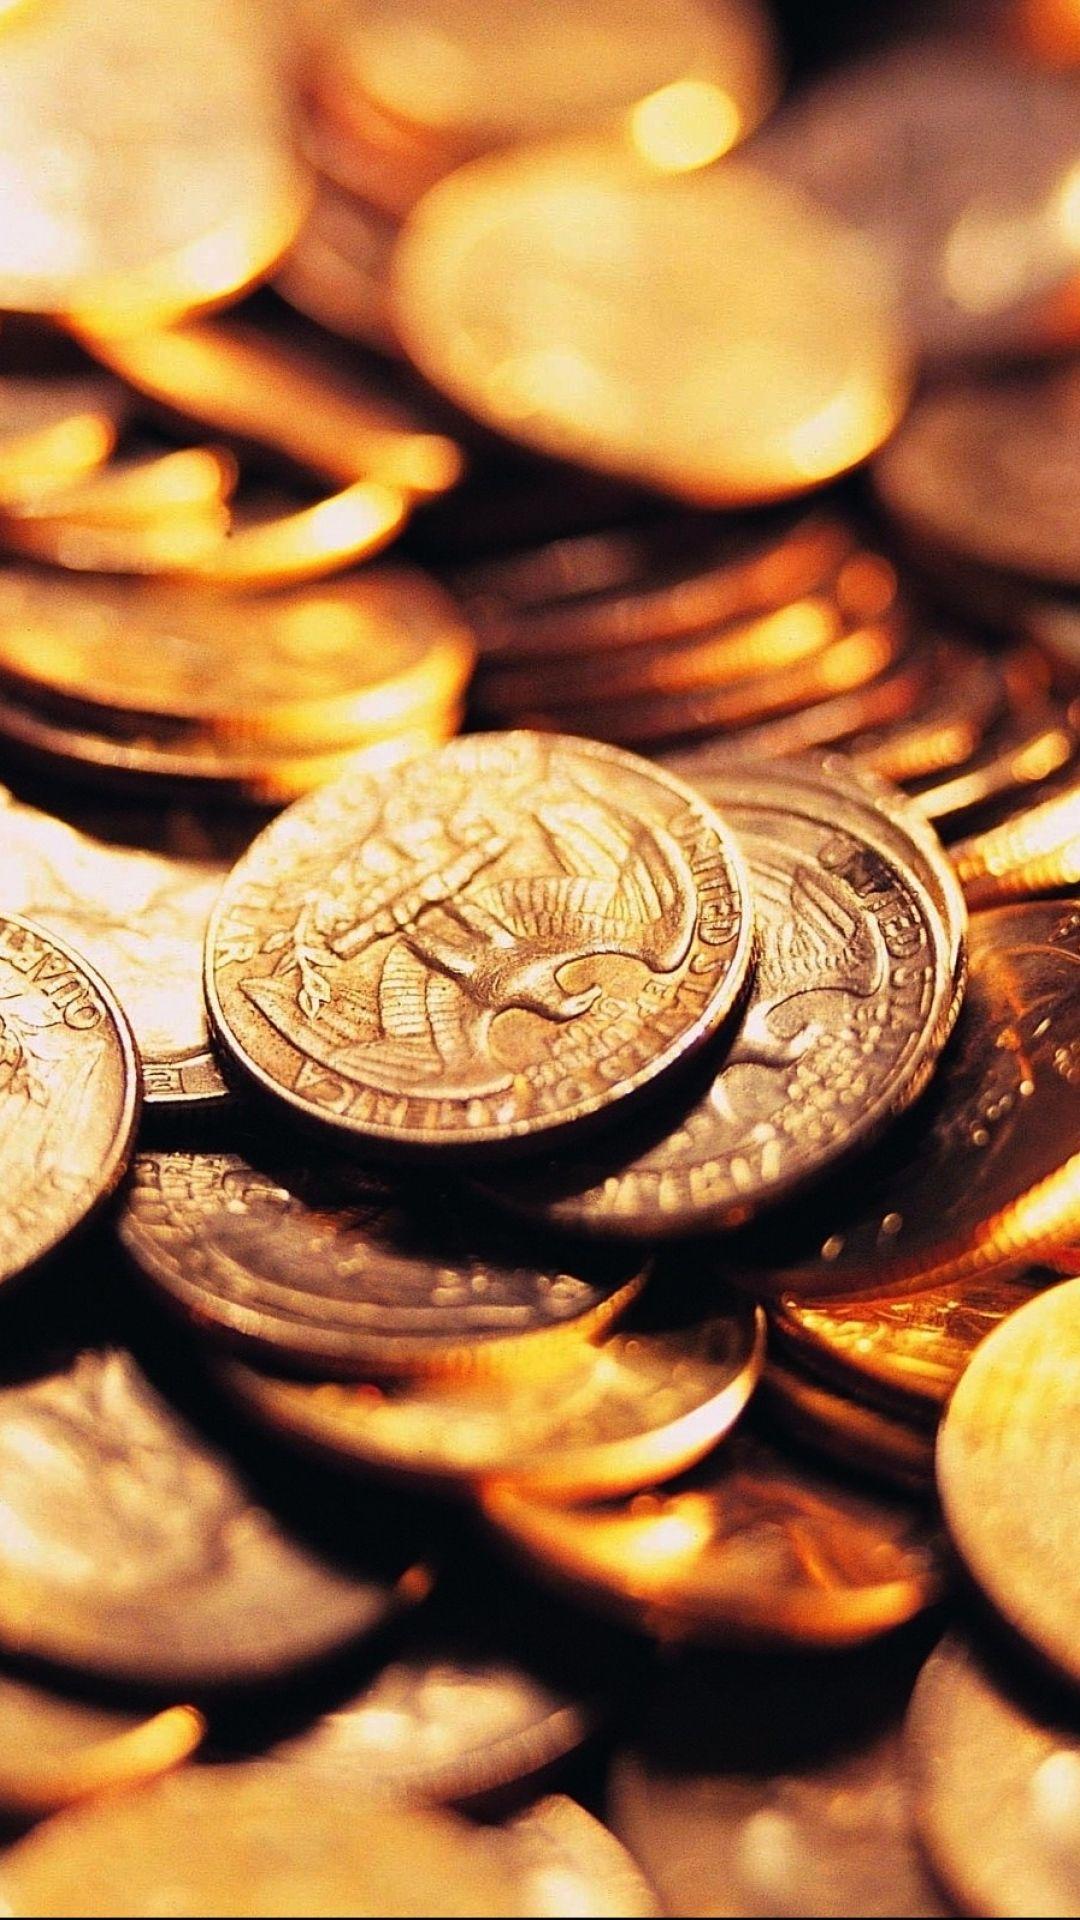 Heap of gold coins - Stock Image - Everypixel